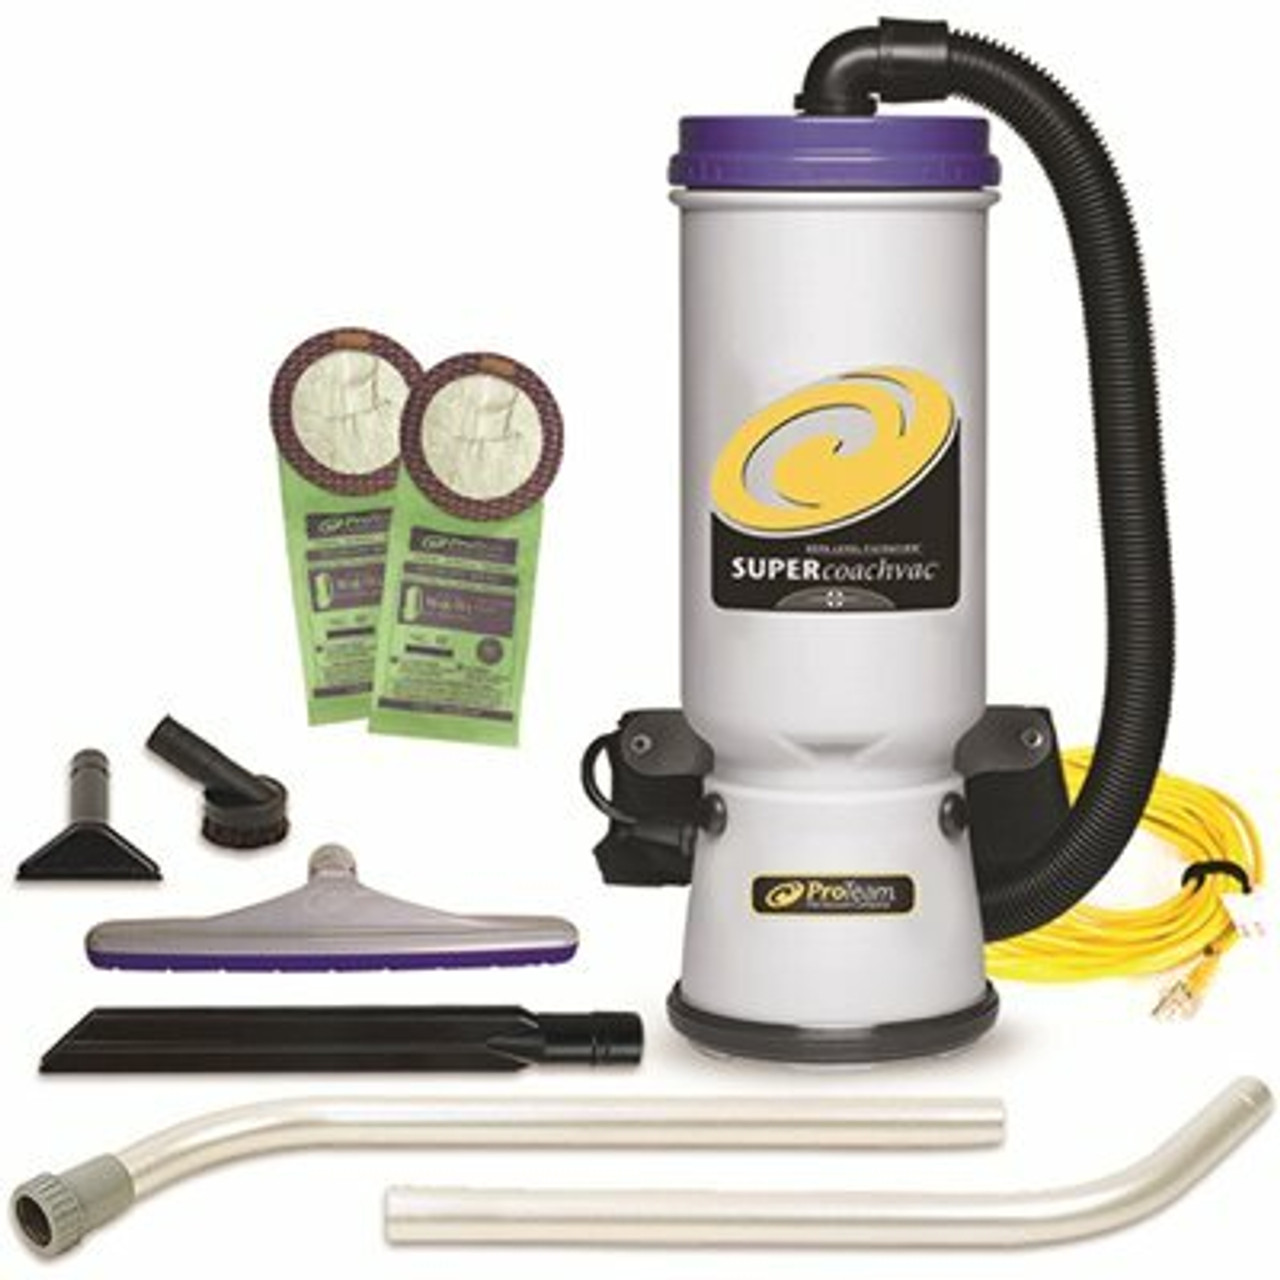 Proteam Super Coachvac 10 Qt. Commercial Backpack Vacuum Cleaner With Xover Multi-Surface 2-Piece Wand Tool Kit